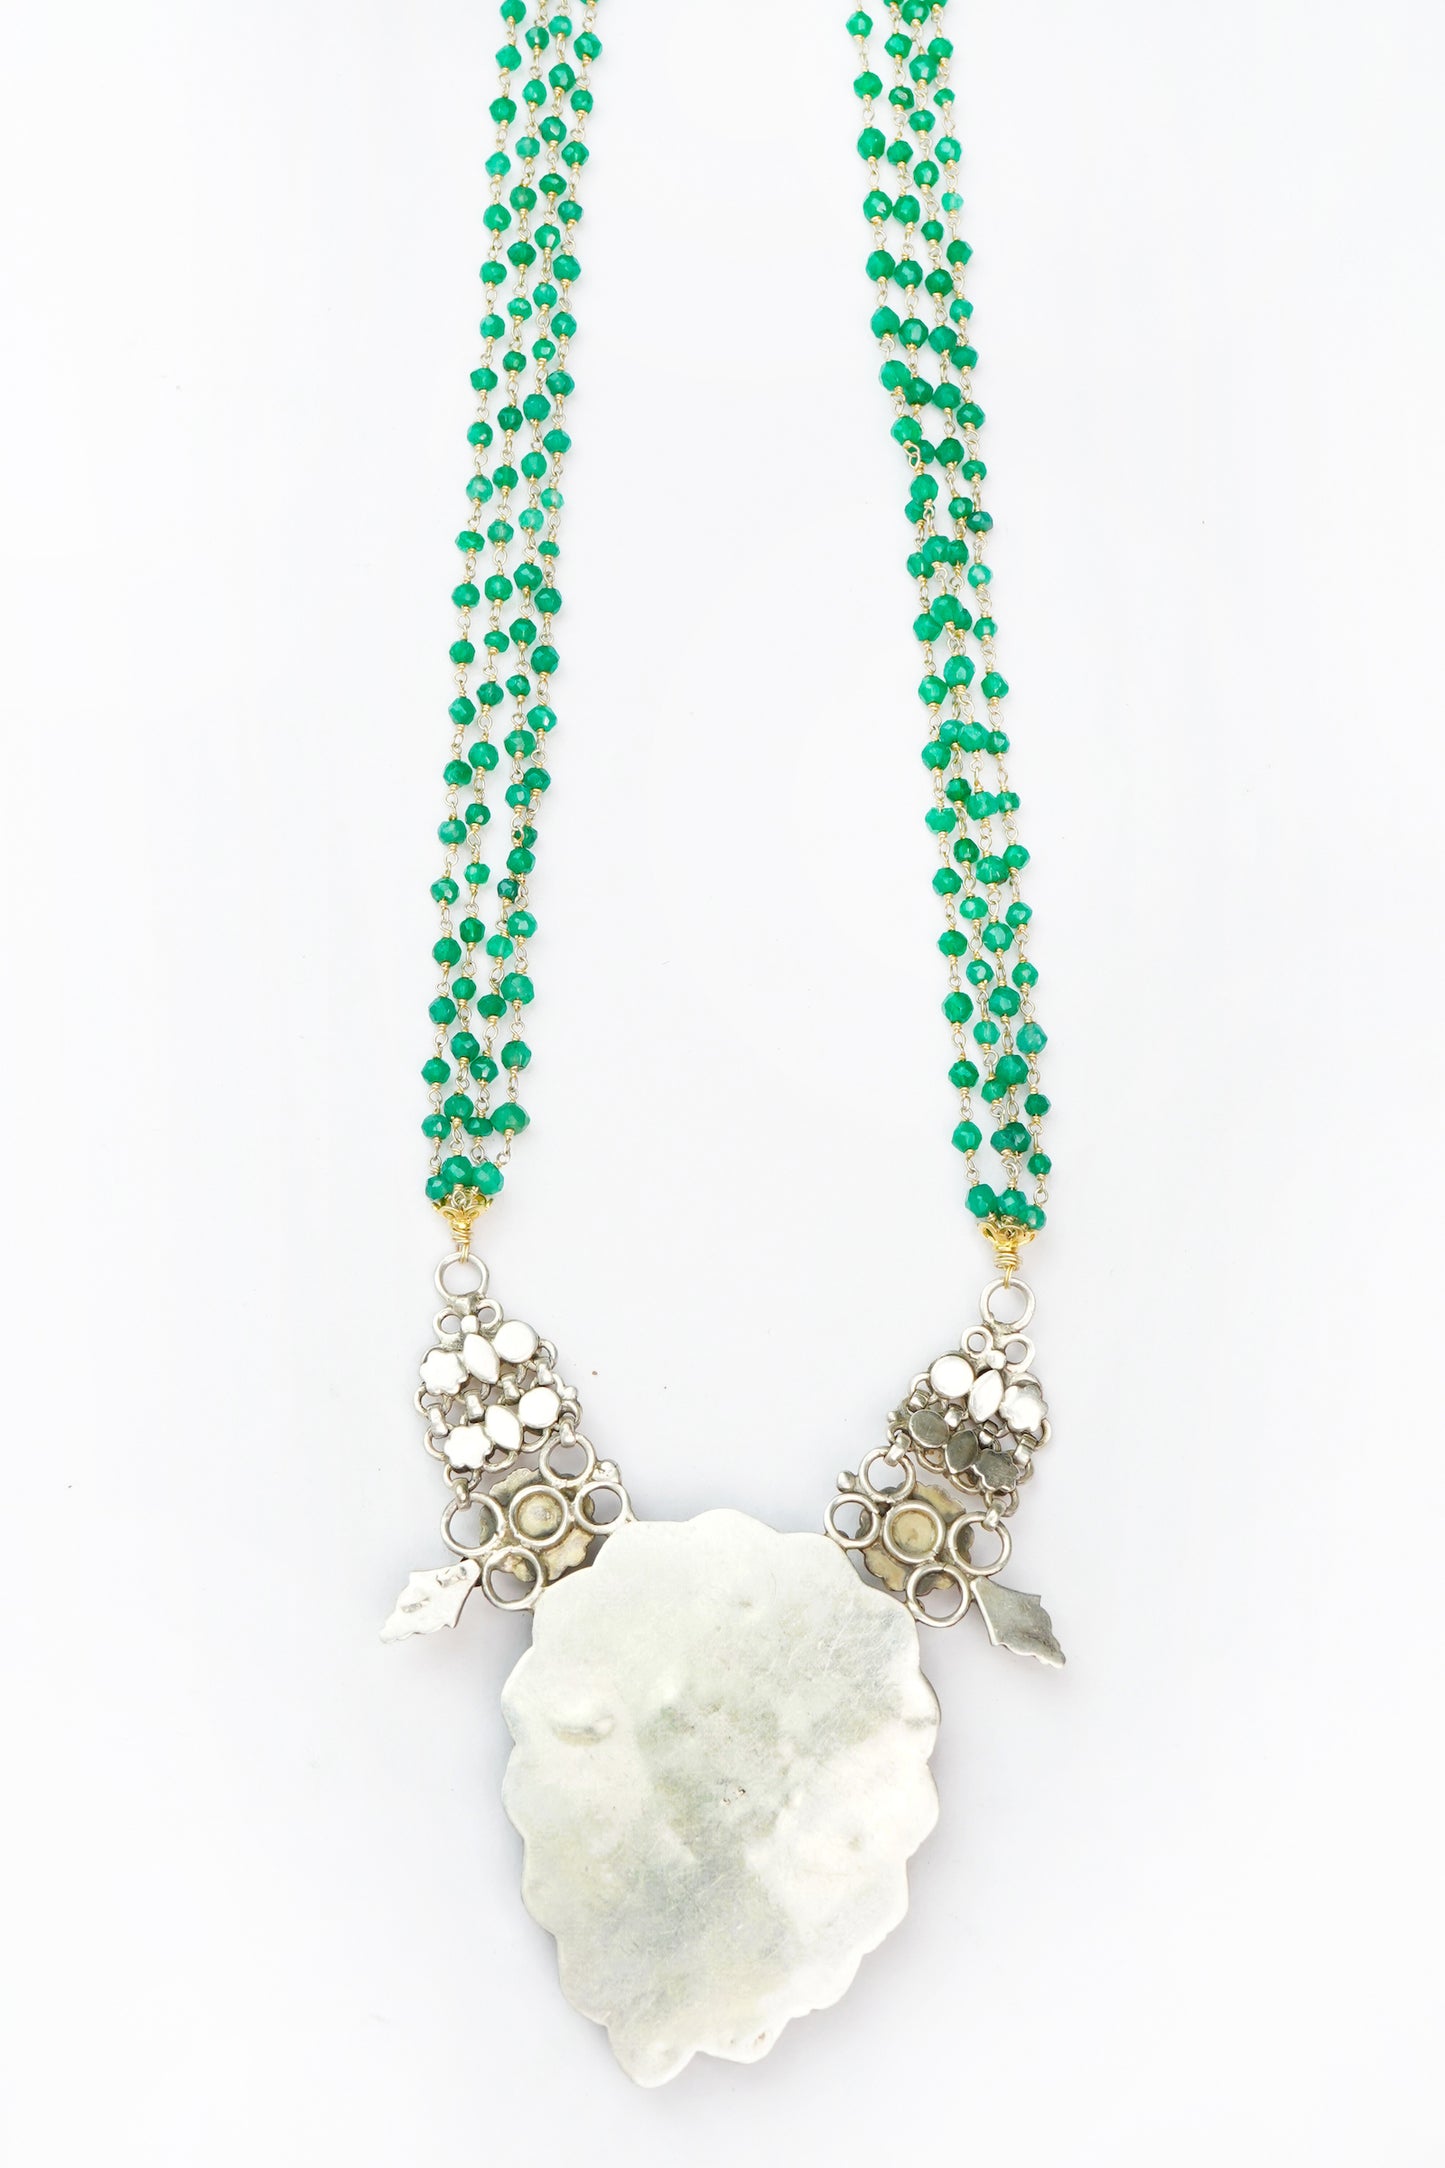 Silver Two Tone Necklace with Green Stone and Emerald Beads - Neeta Boochra Jewellery